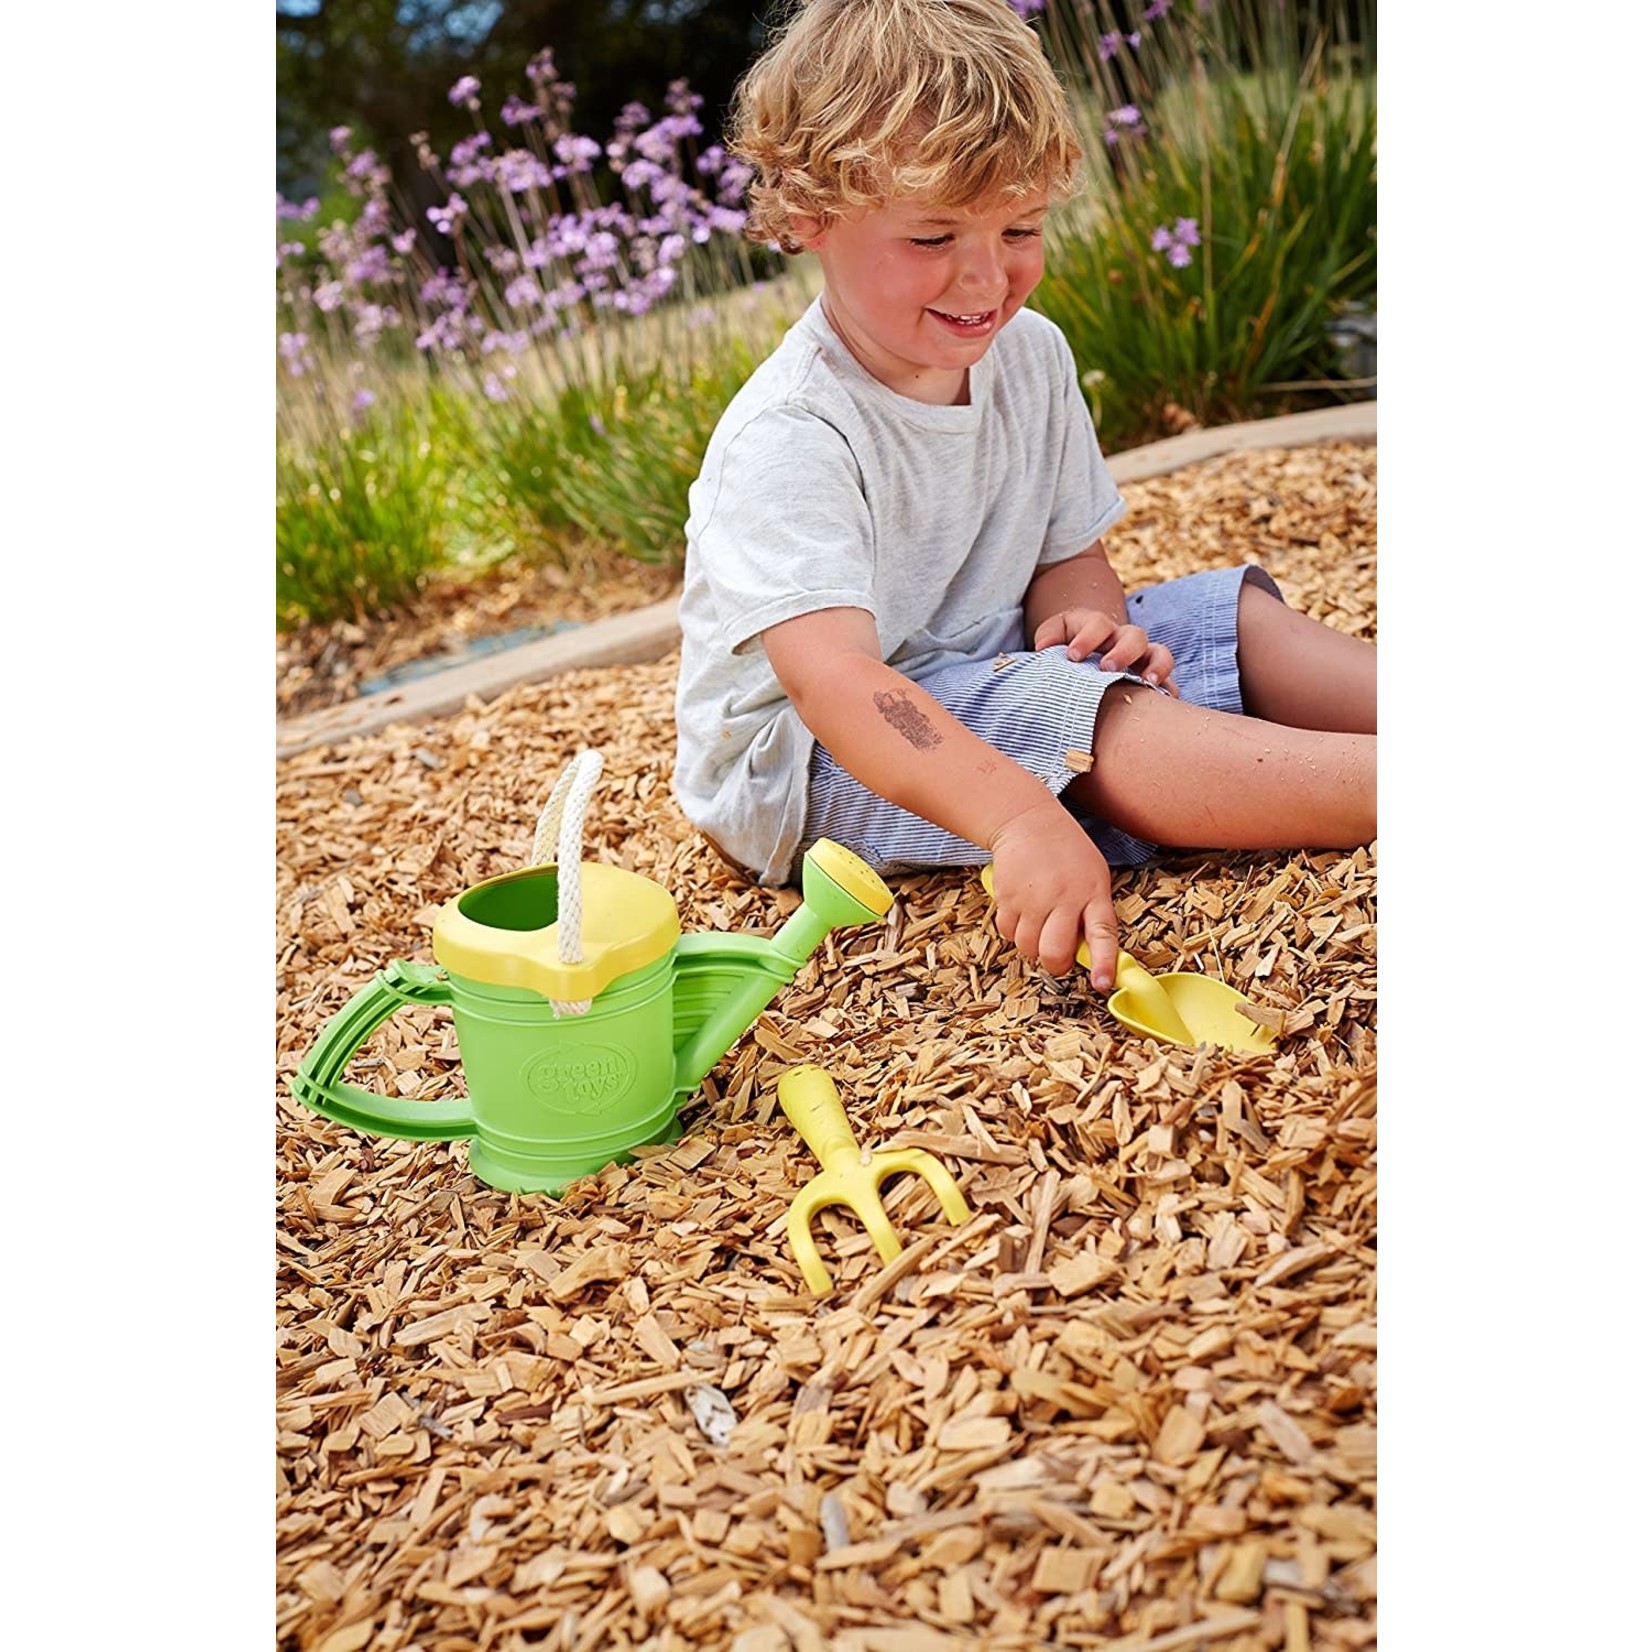 Green Toys - Watering Can , Green (18m+)